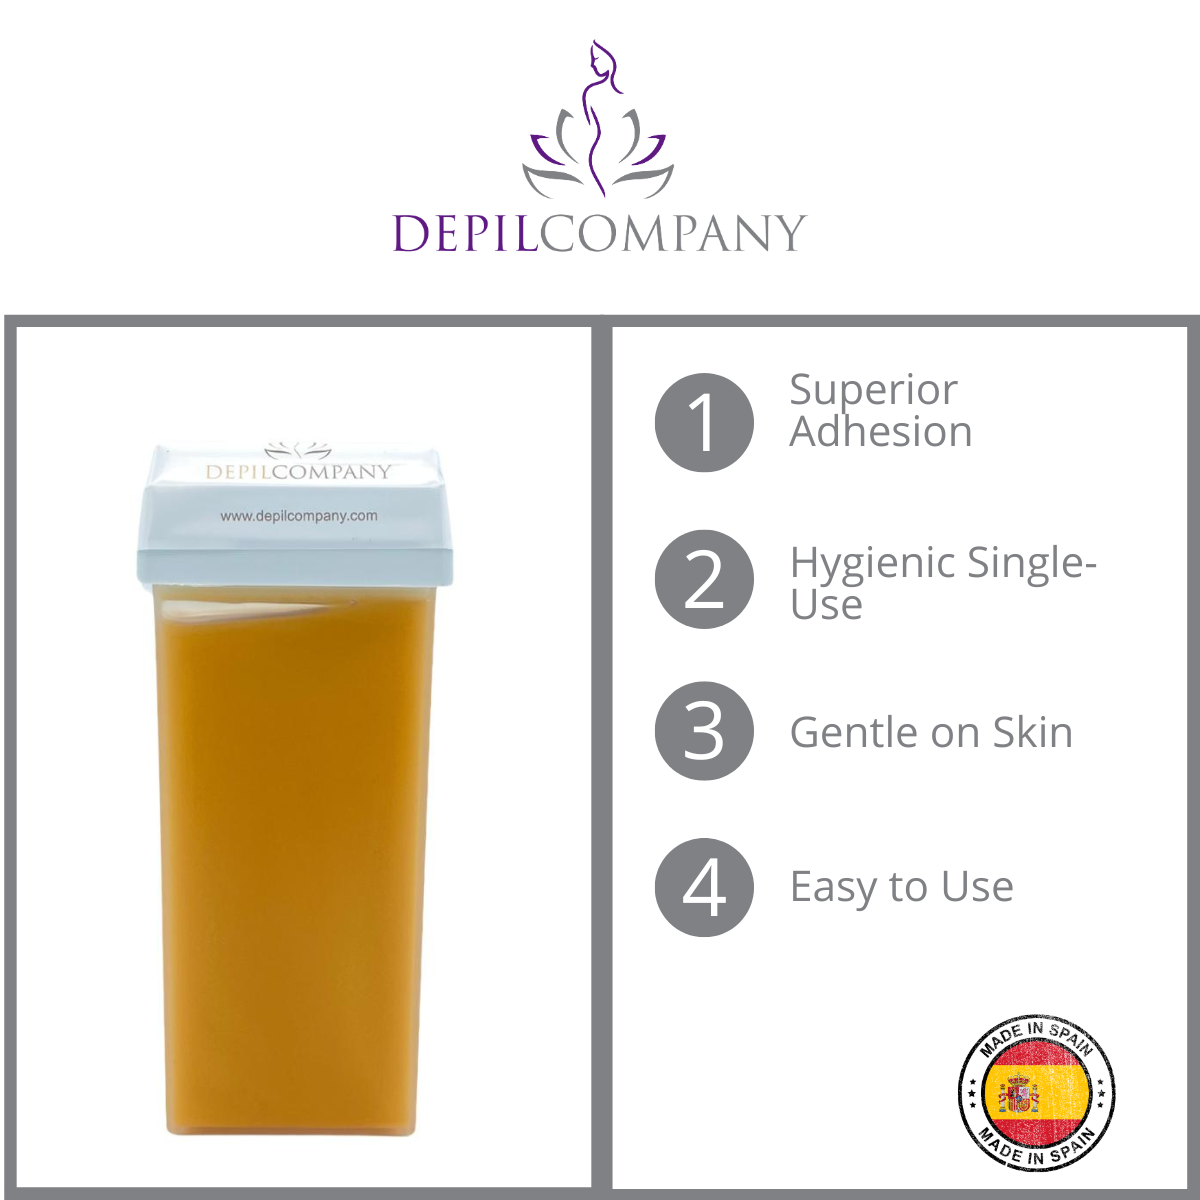 Depilcompany Roll-on Honey Wax, 6 units pack, superior adhesion, hygienic single-use, gentle on skin, easy to use